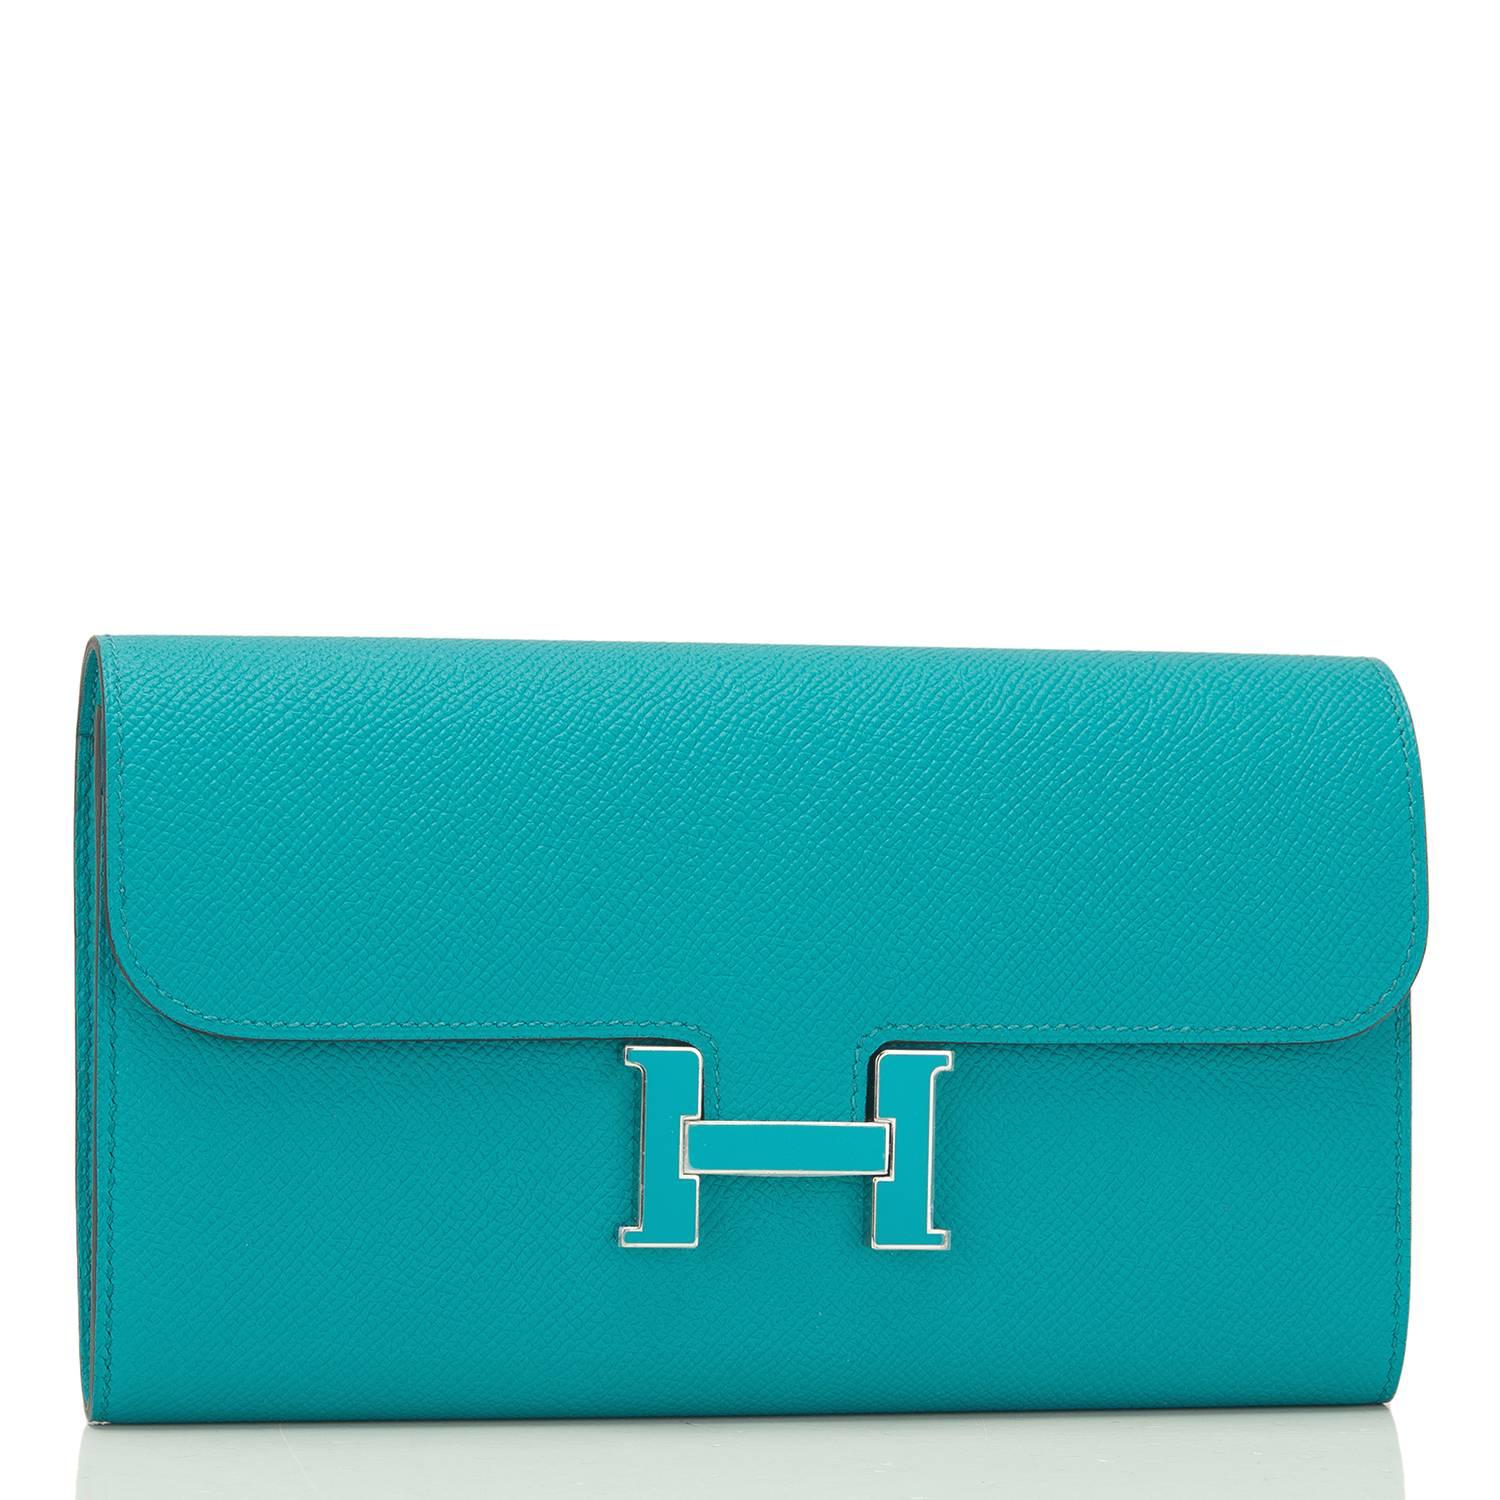 Hermes Blue Paon Constance long wallet/clutch of epsom leather with palladium hardware.

This limited edition wallet, which can also be used as a clutch, has a matching blue paon lacquer 